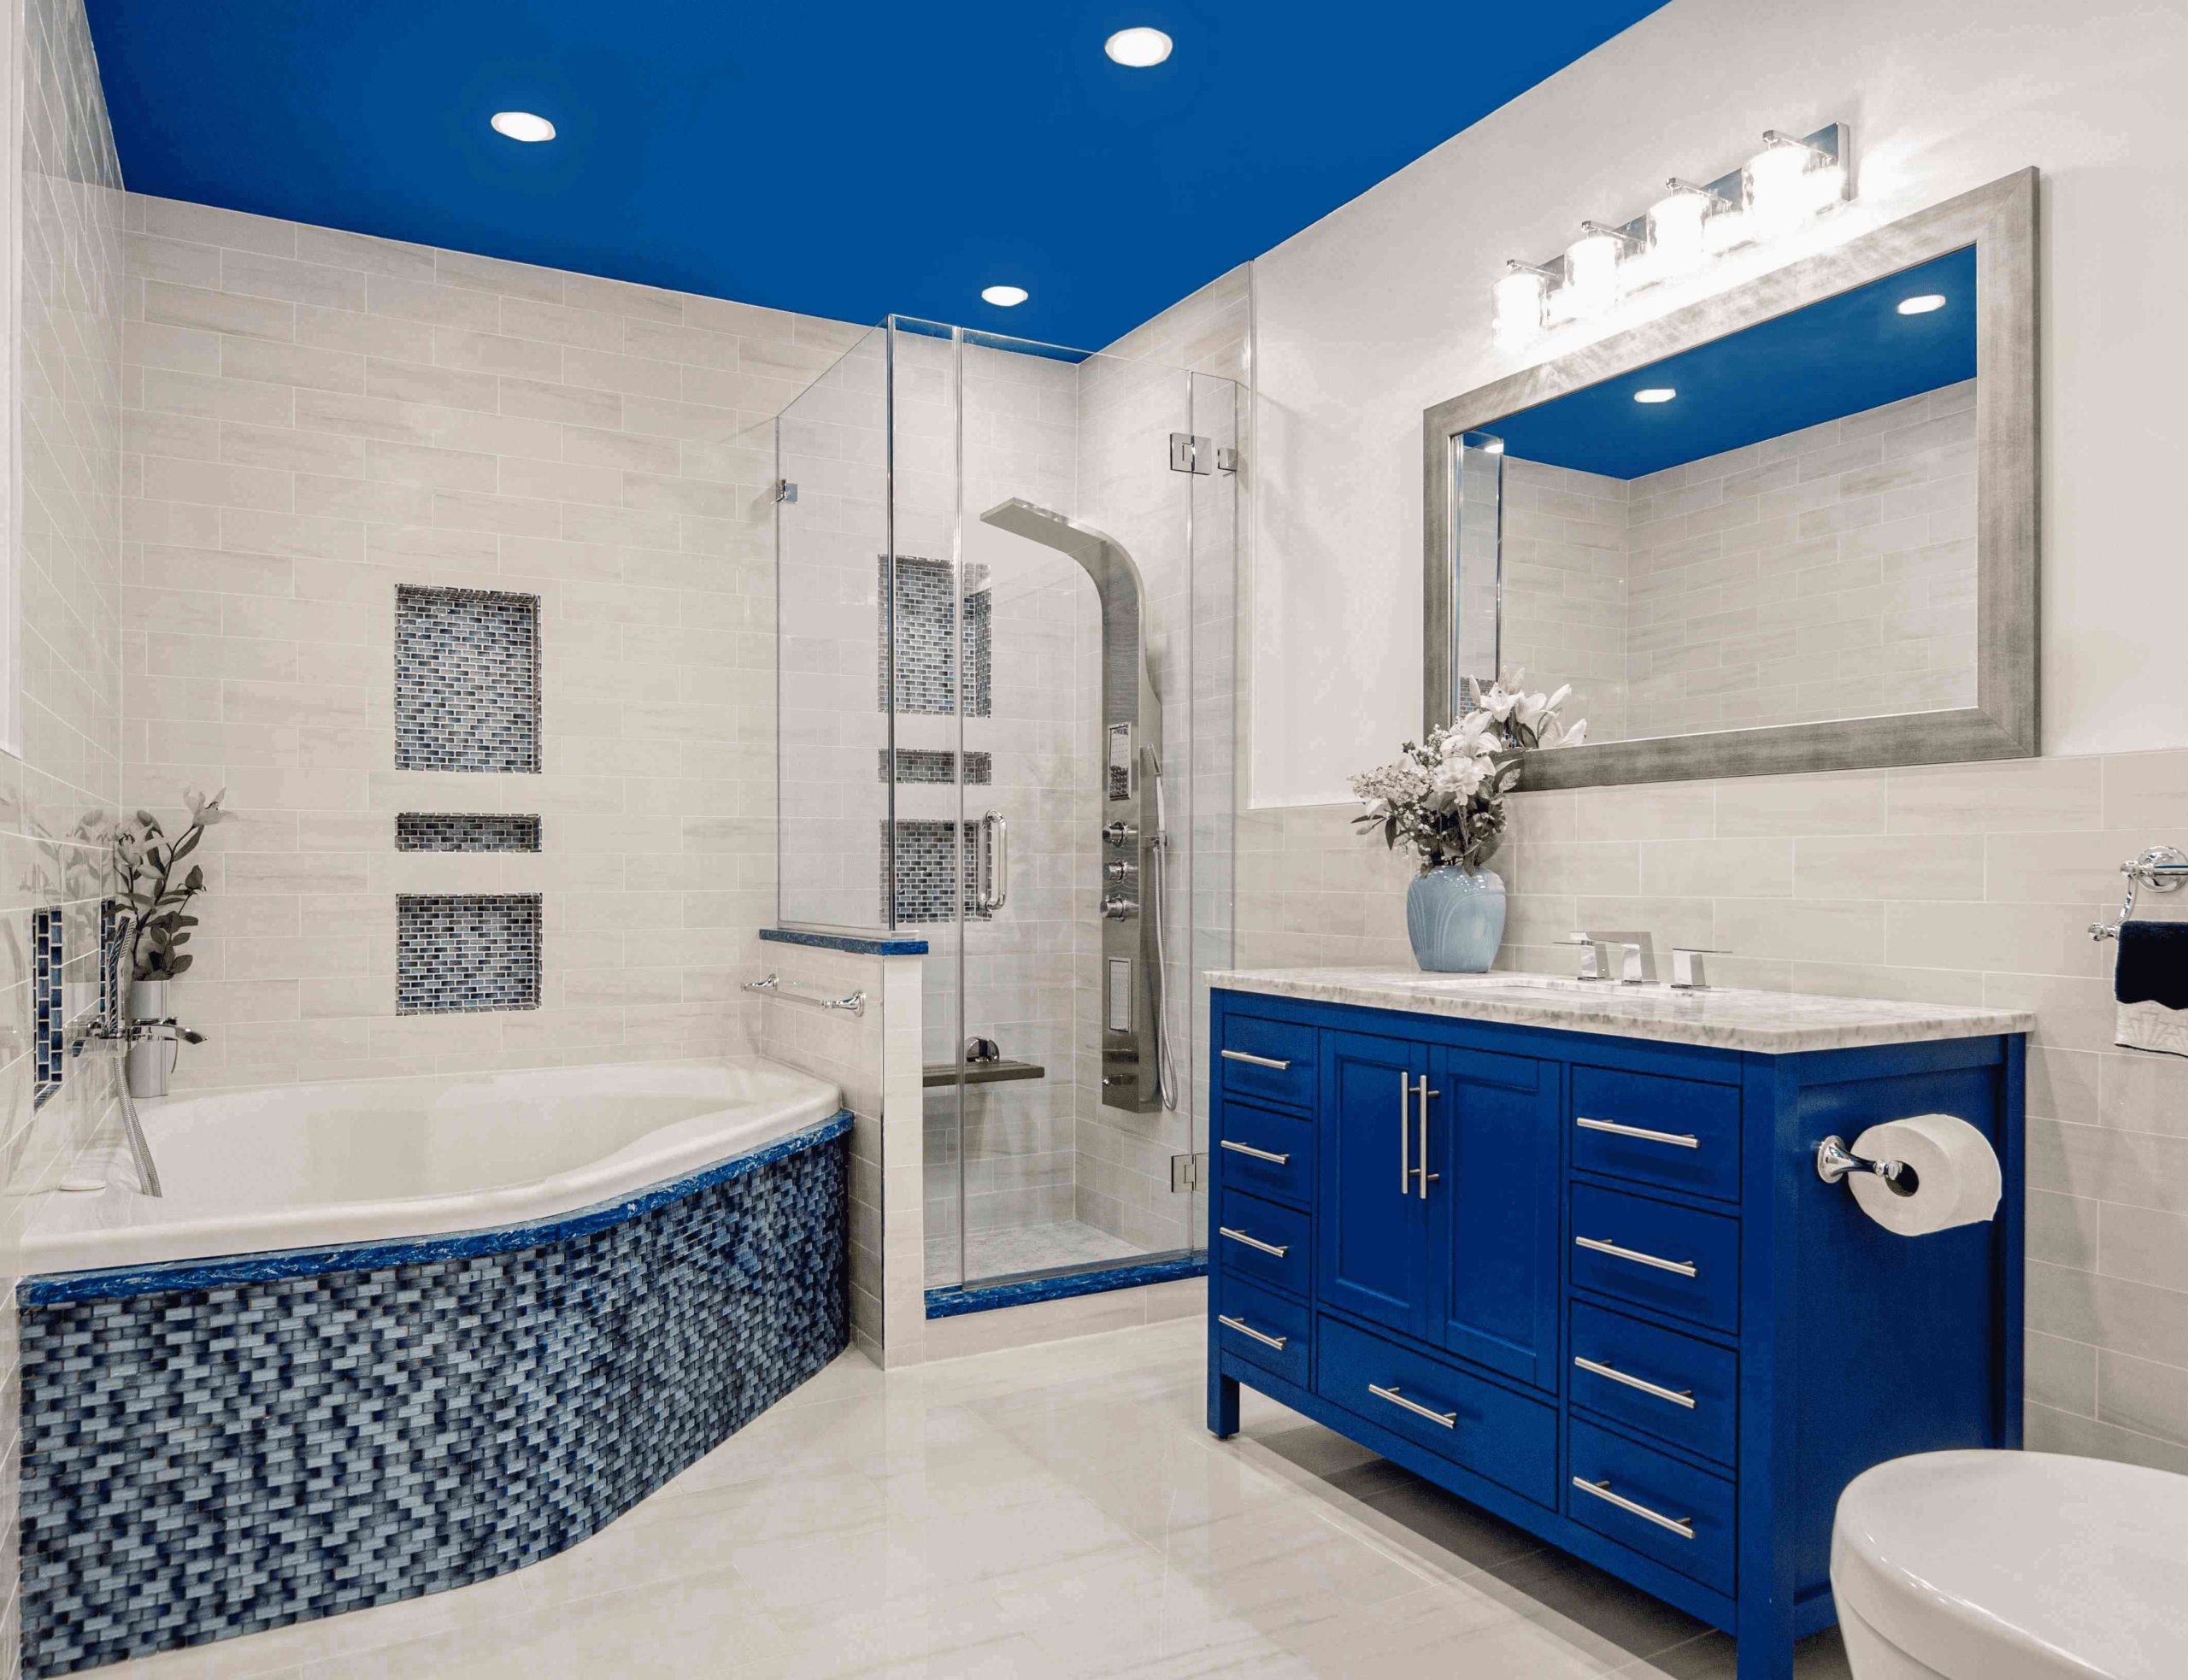 2021 Bathroom Remodel Trends That Will Be Huge